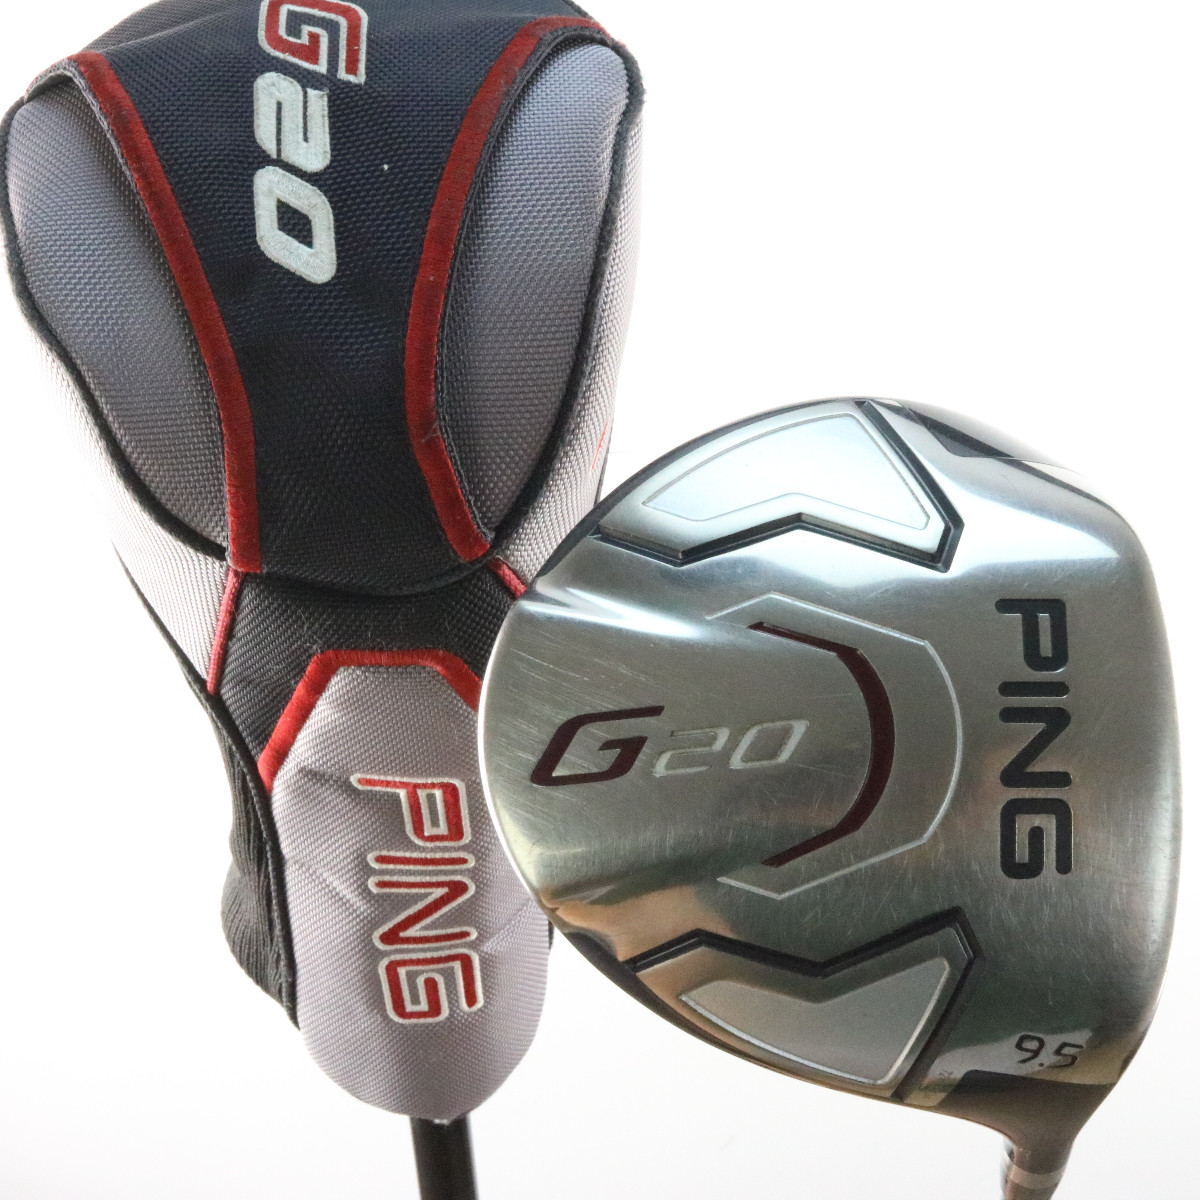 ping g20 driver shaft specifications